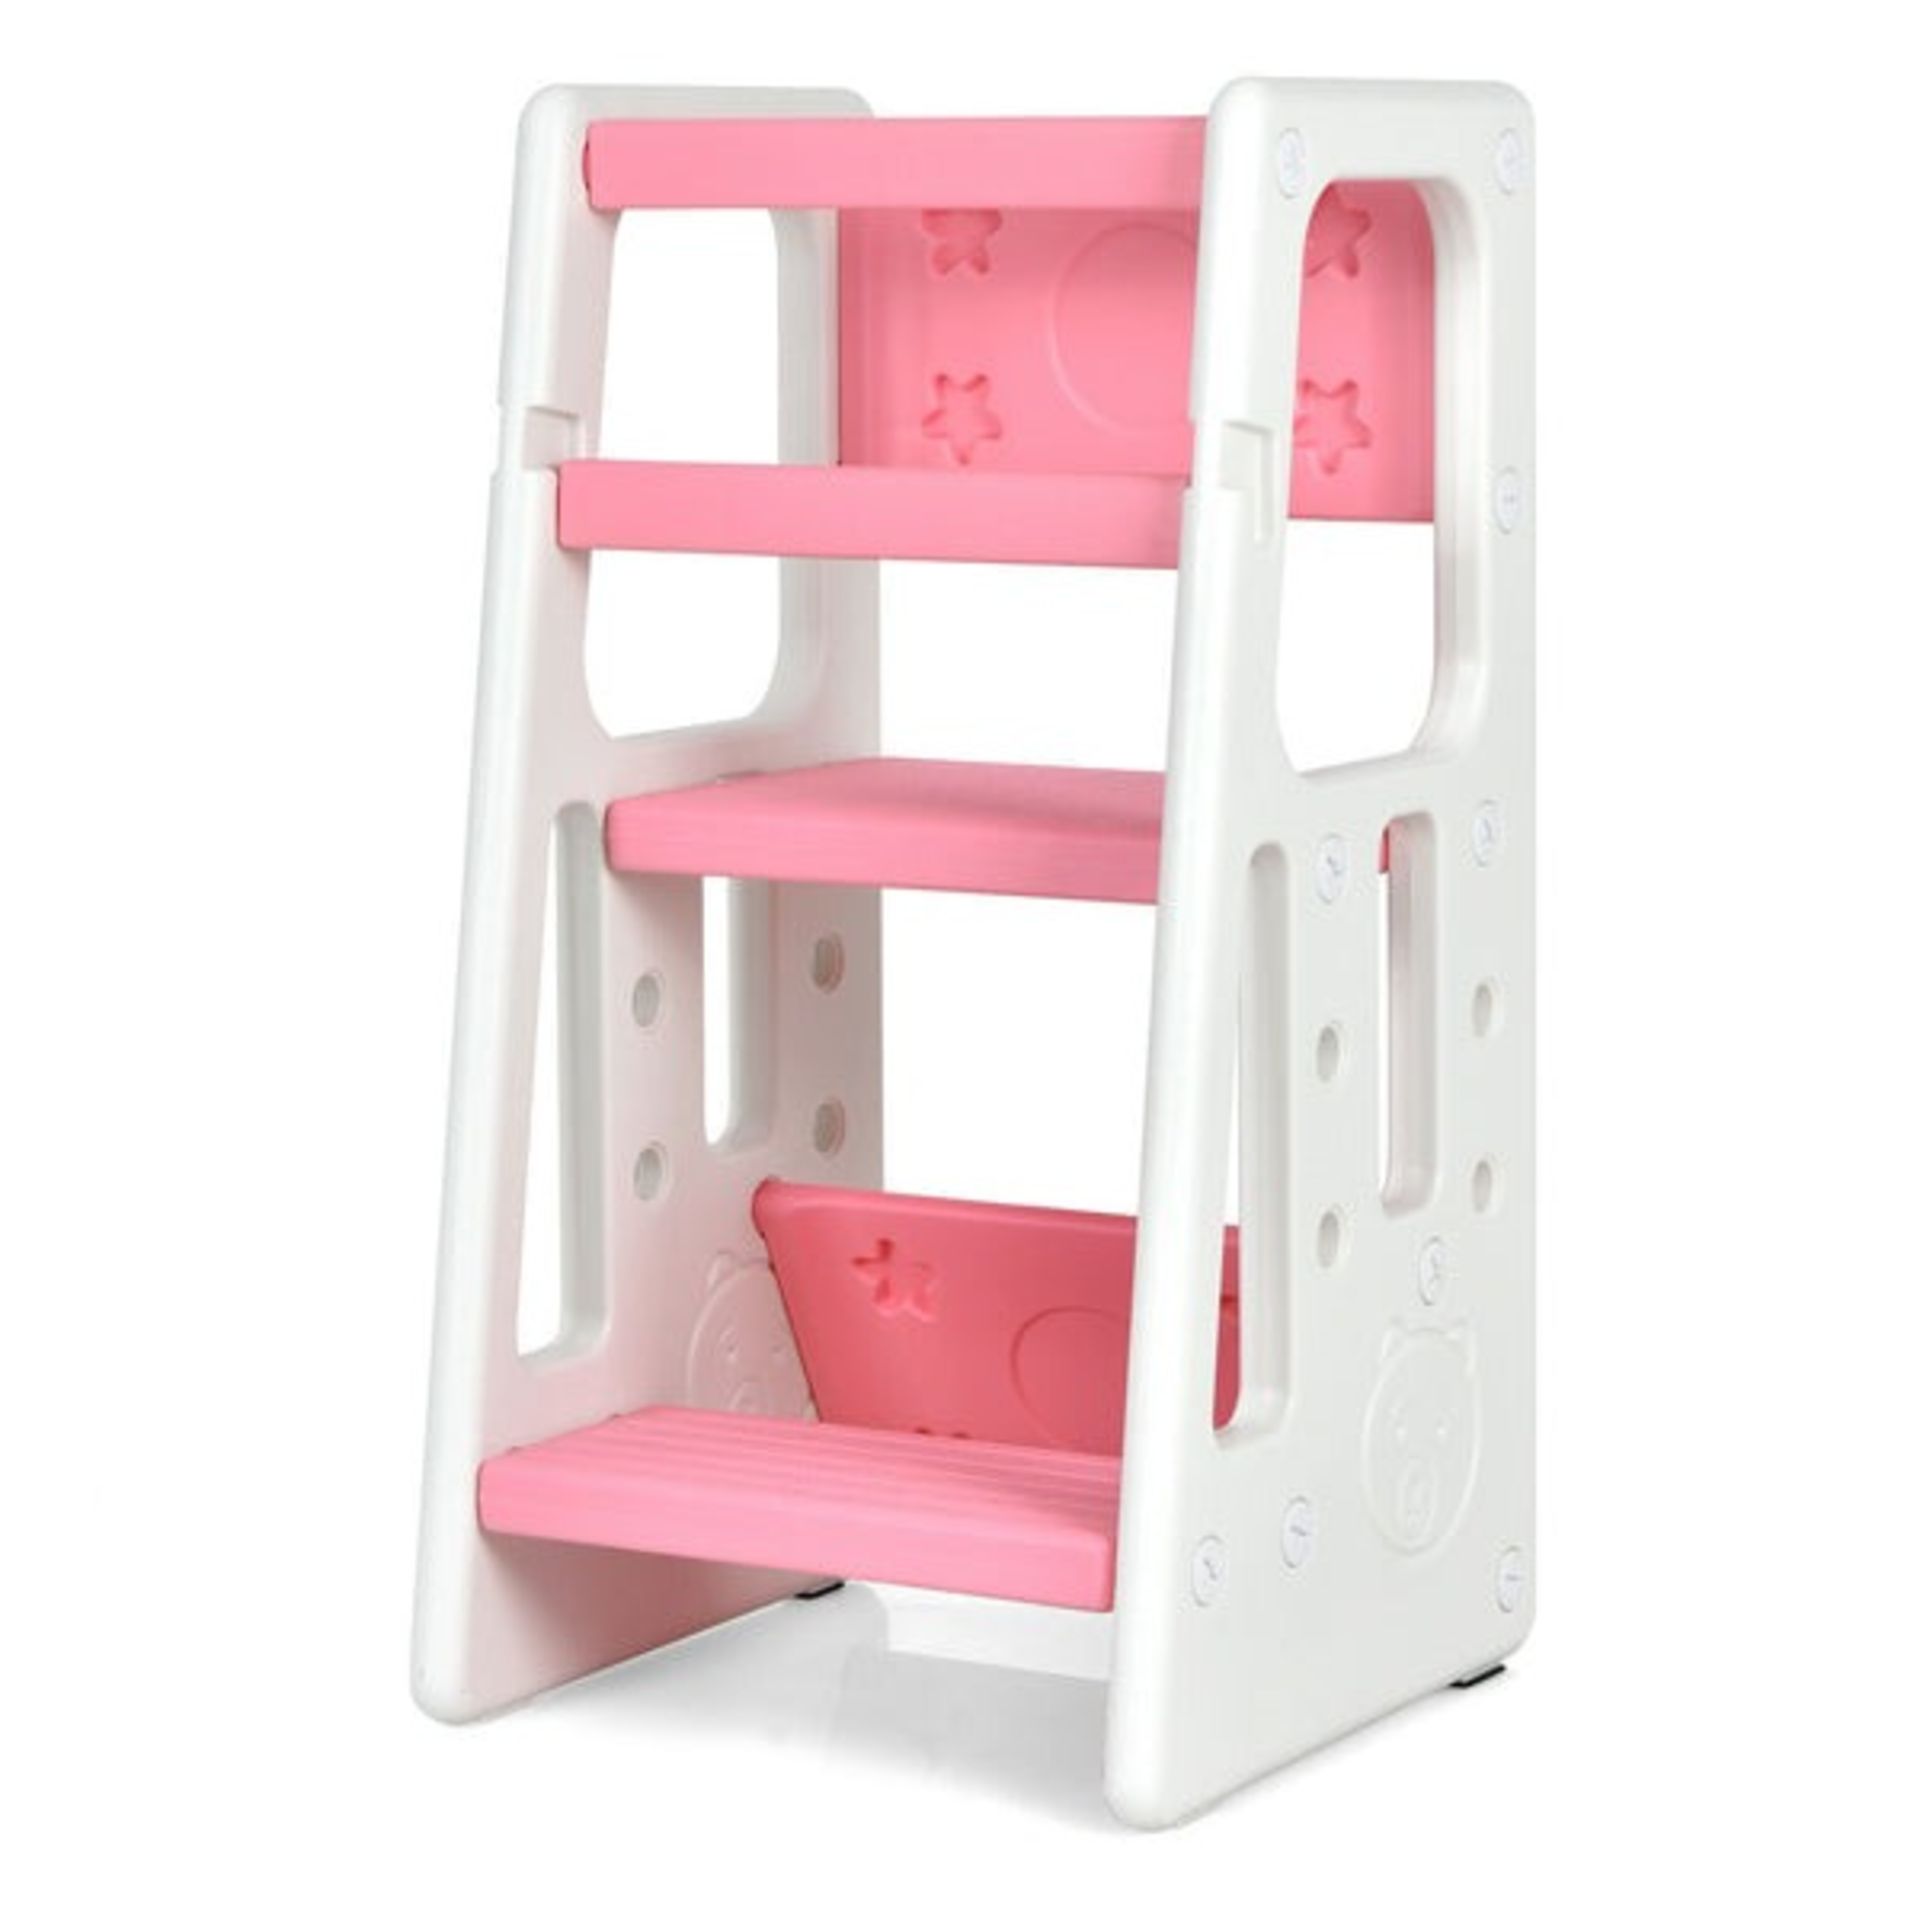 Kids Non-slip Kitchen Step Stool with Double Safety Rails-Pink - ER54